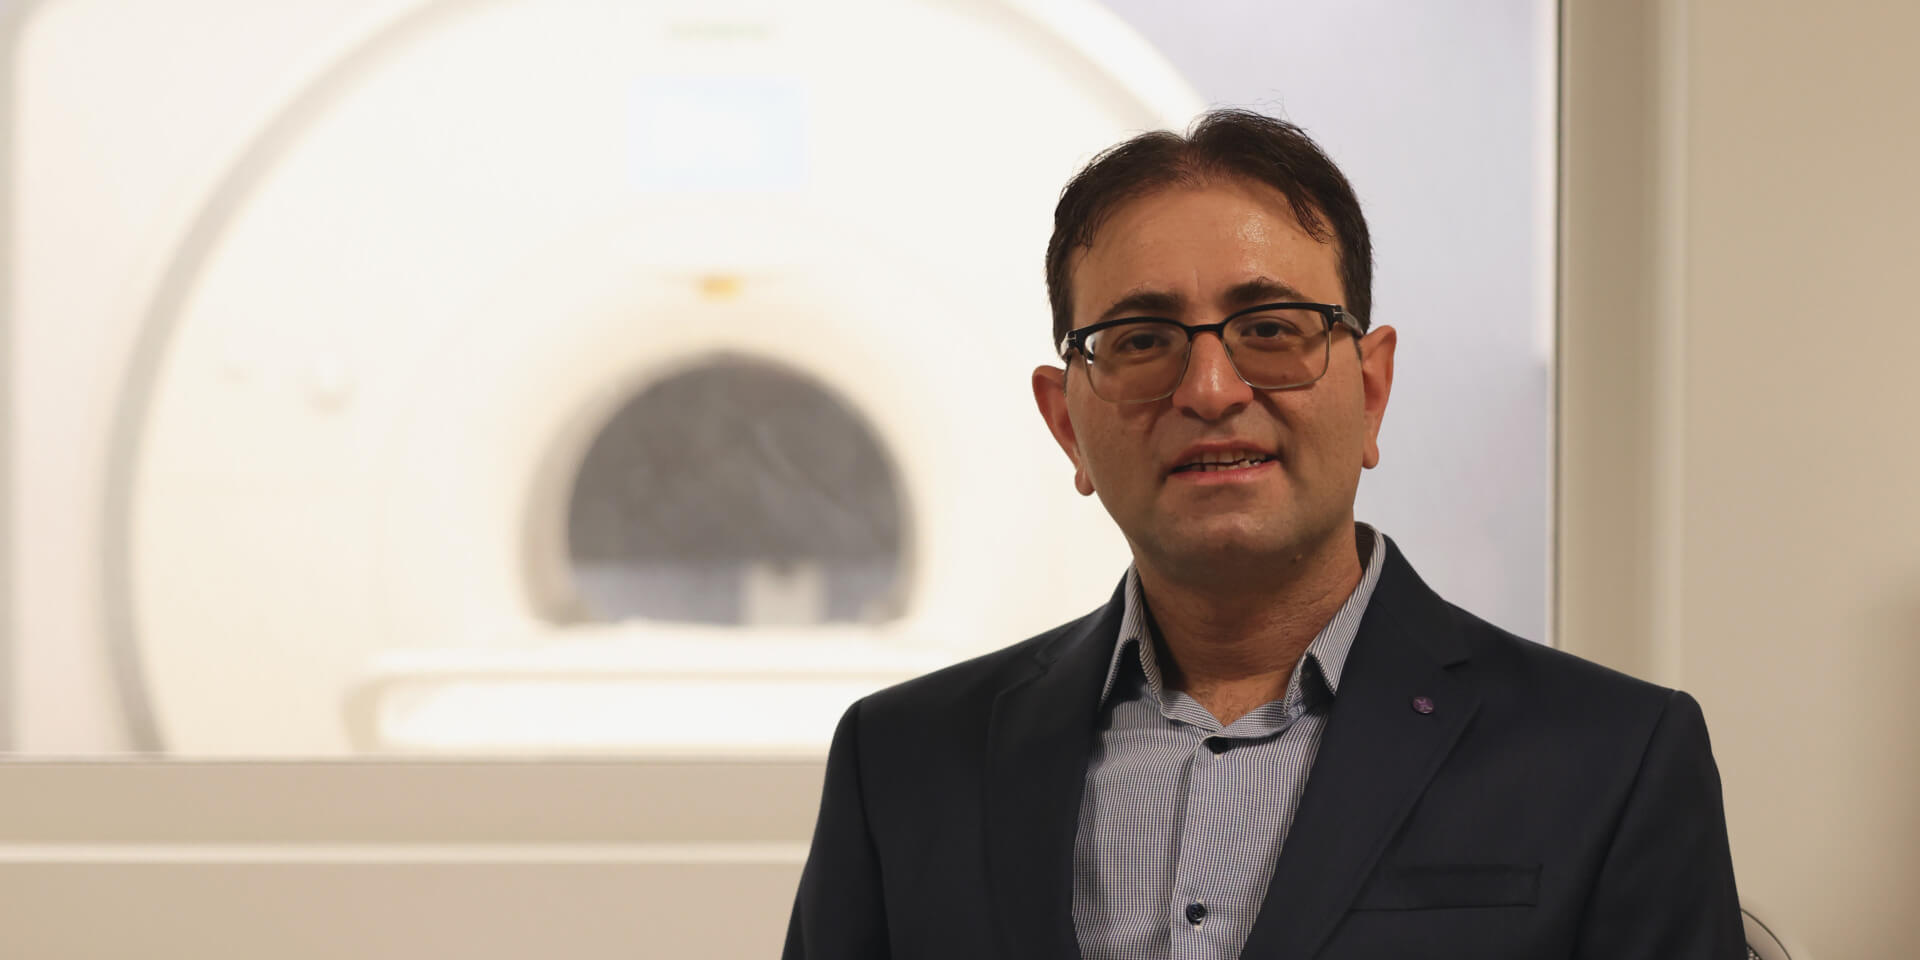 Featured image for “Mahdi Soltanolkotabi Receives NIH Director’s New Innovator Award for Reliable AI for MRI”